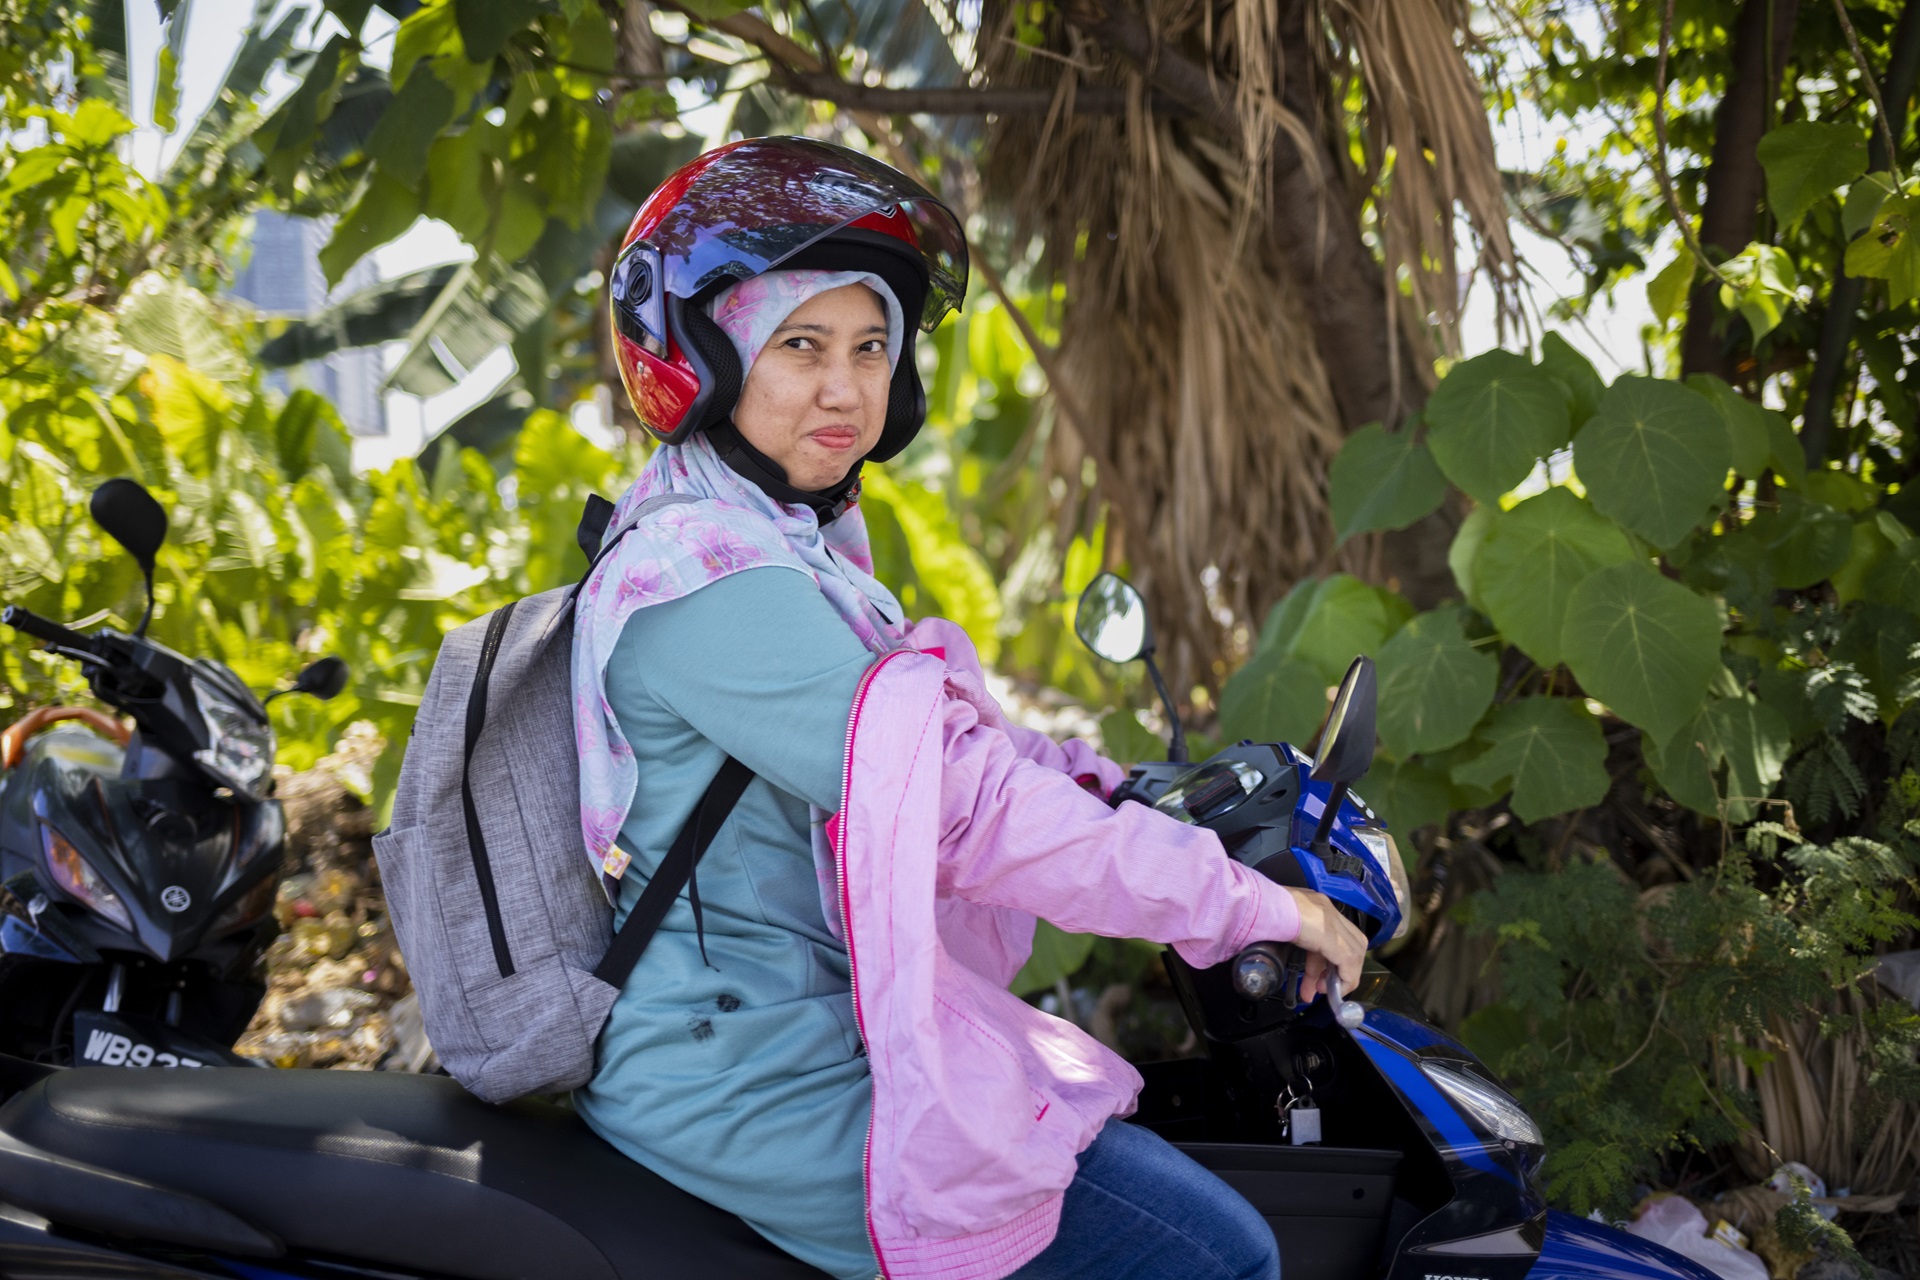 Woman in a headscarf on a scooter